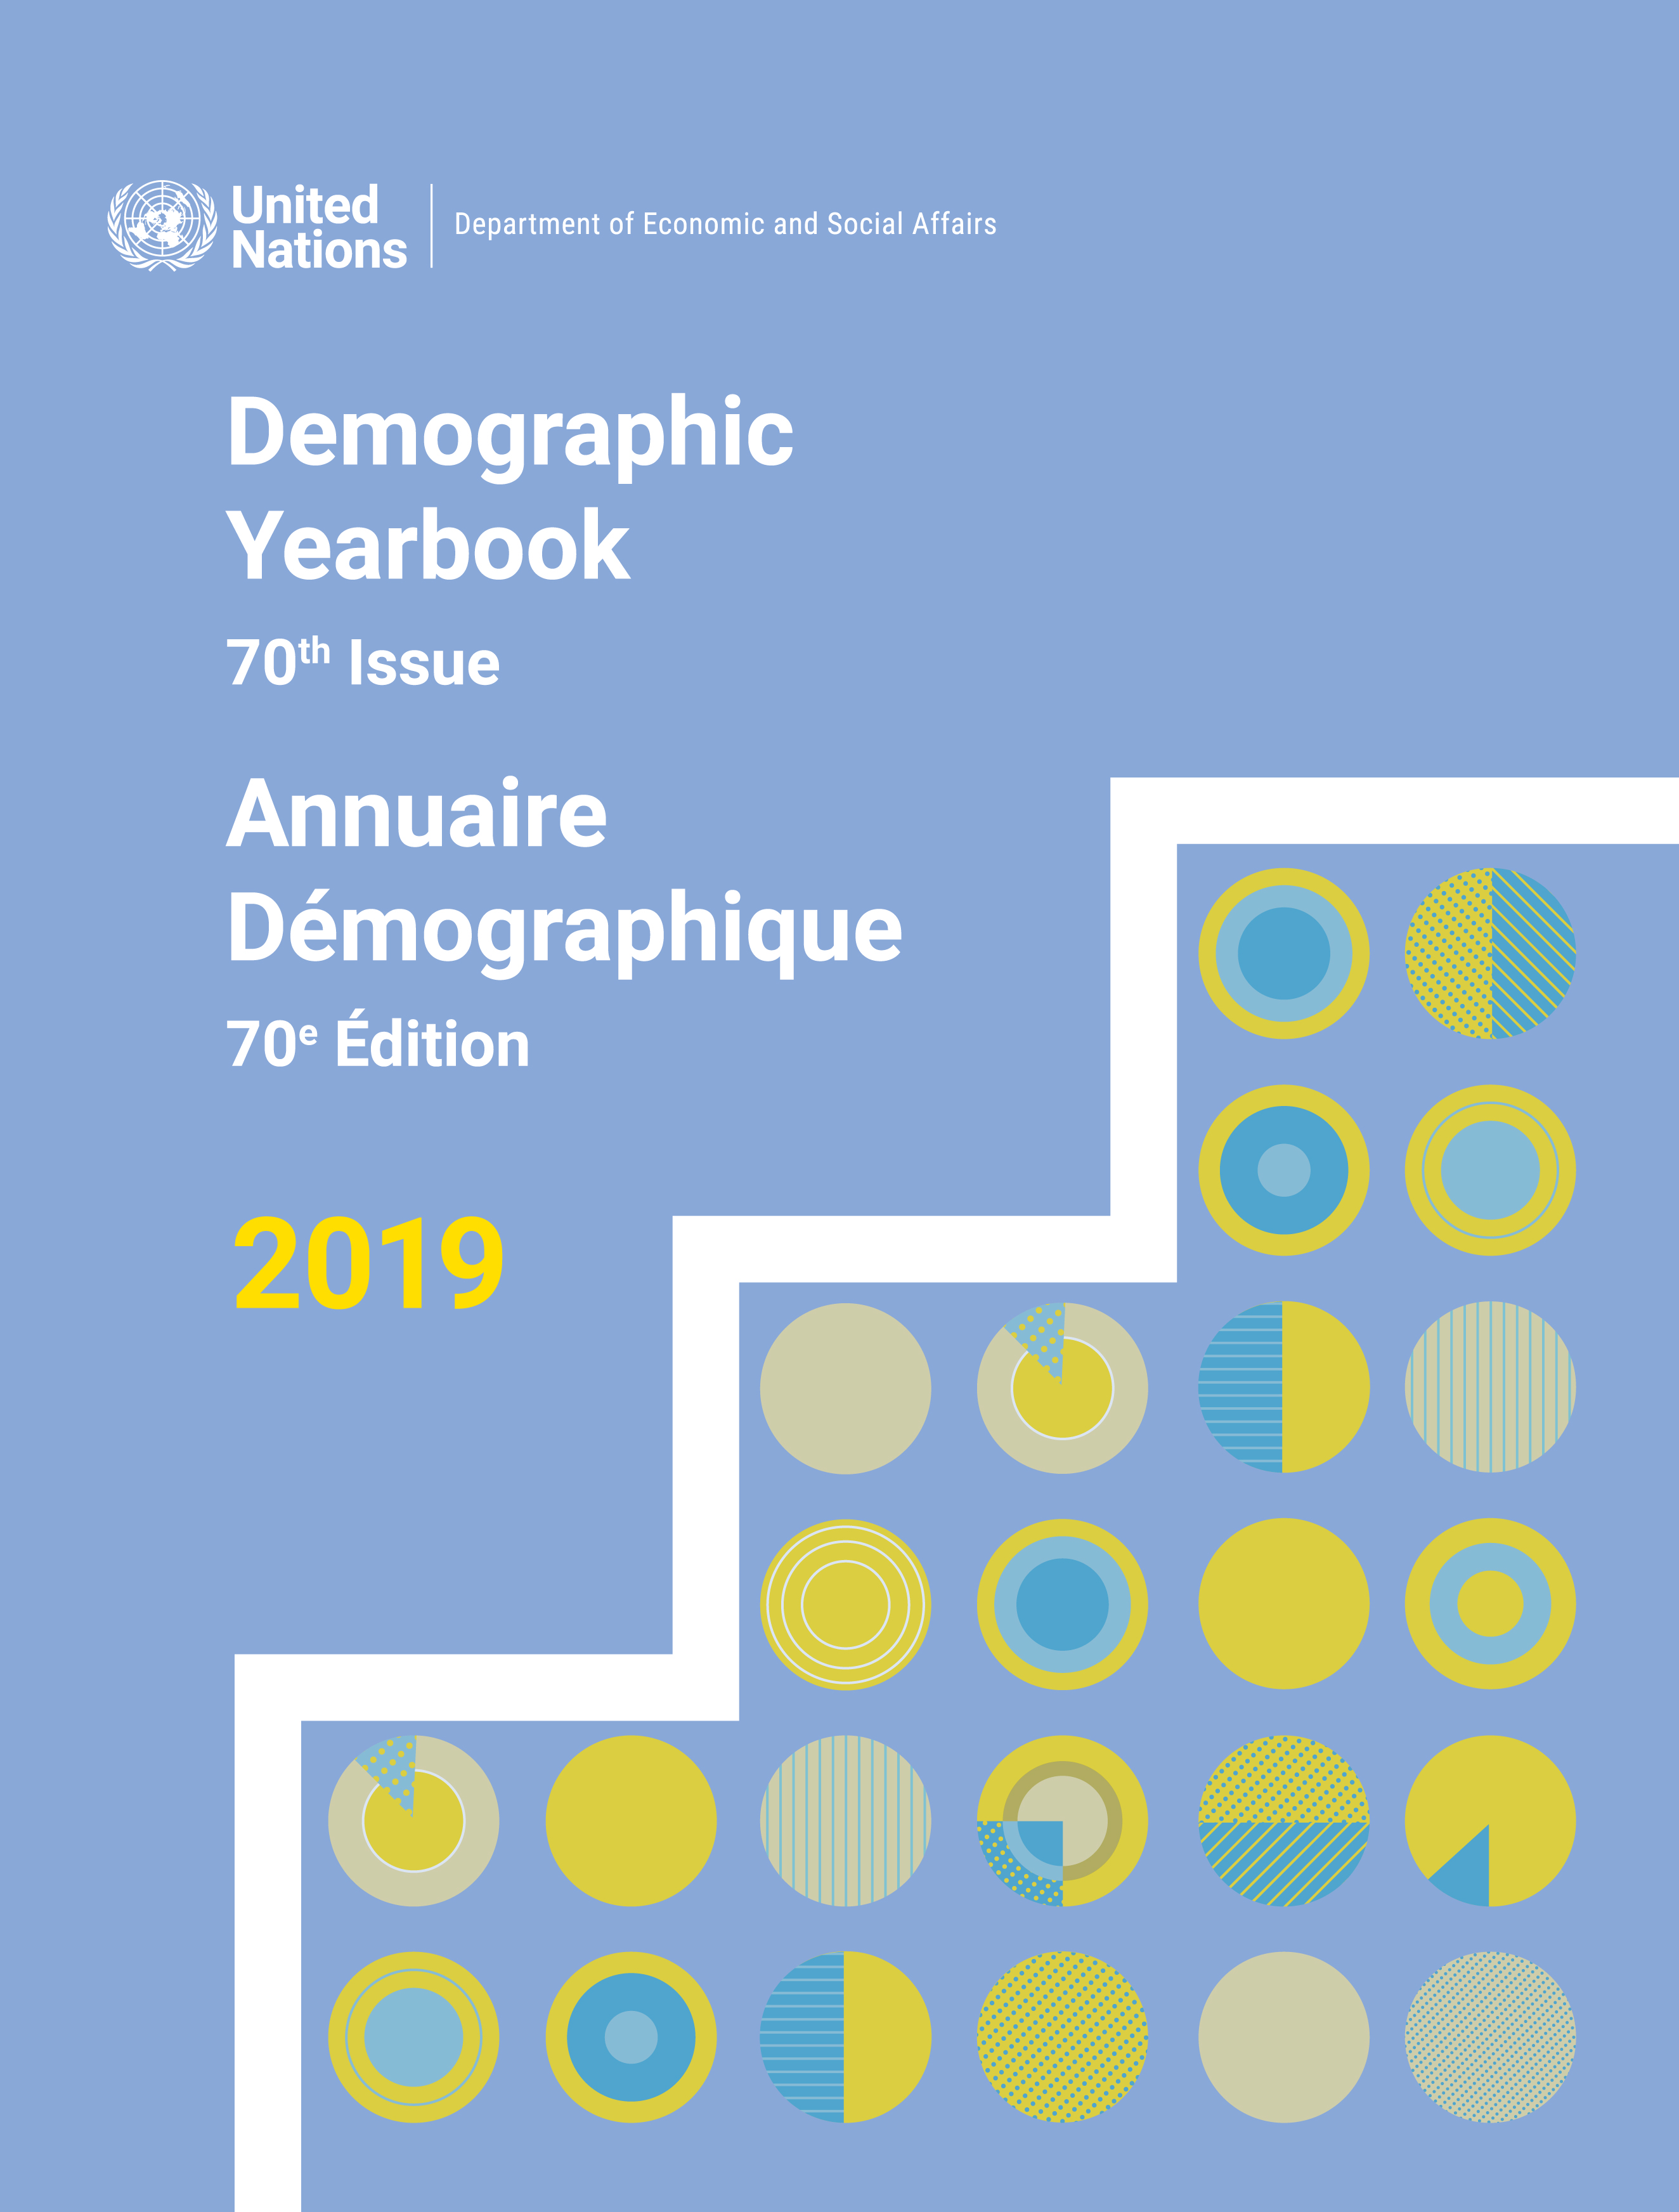 image of United Nations Demographic Yearbook 2019